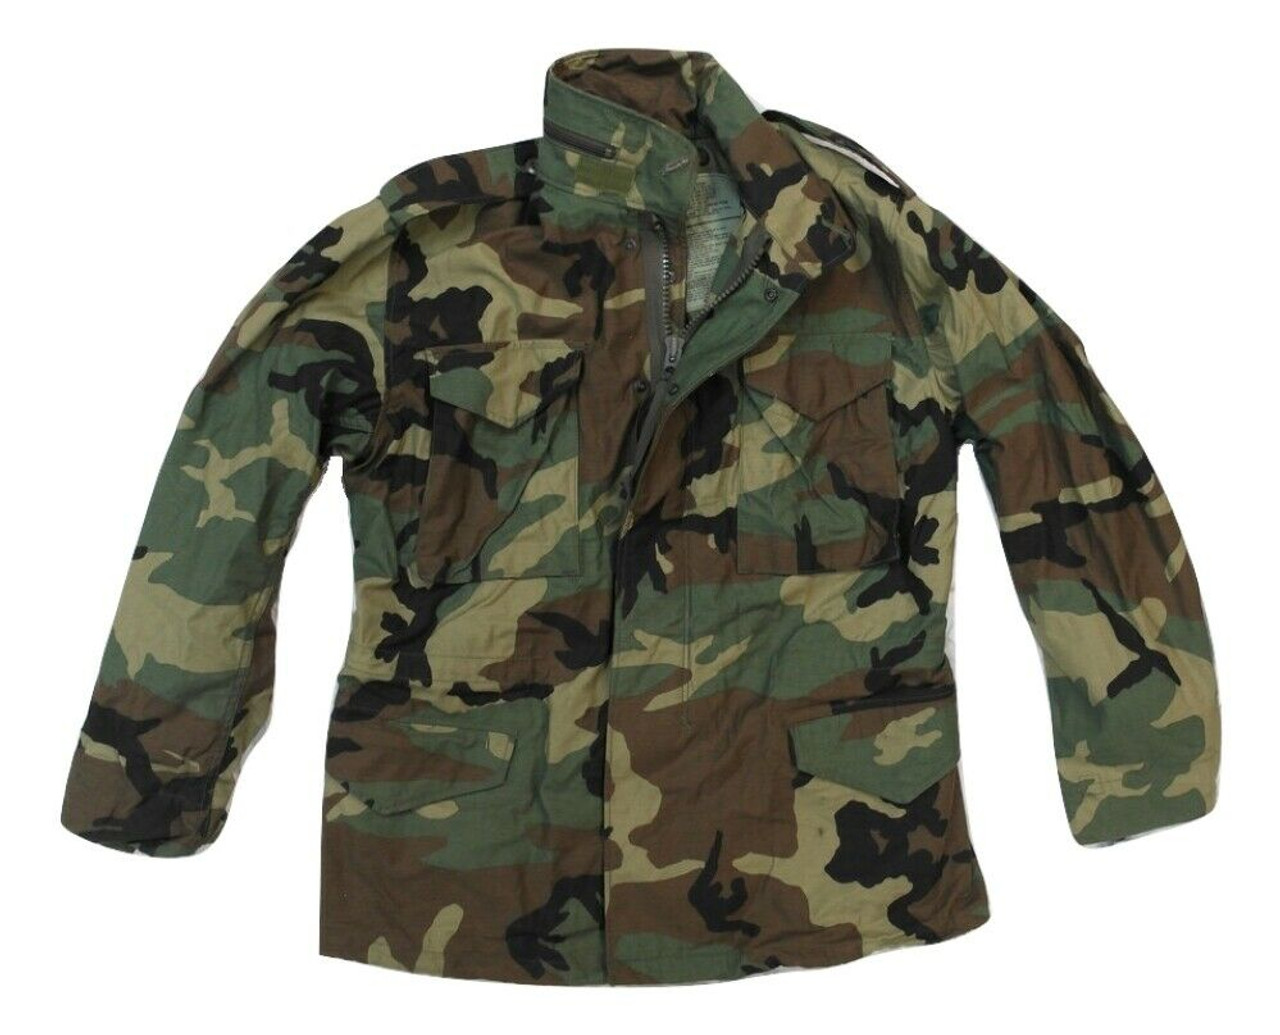 US Issued M65 Field Jacket